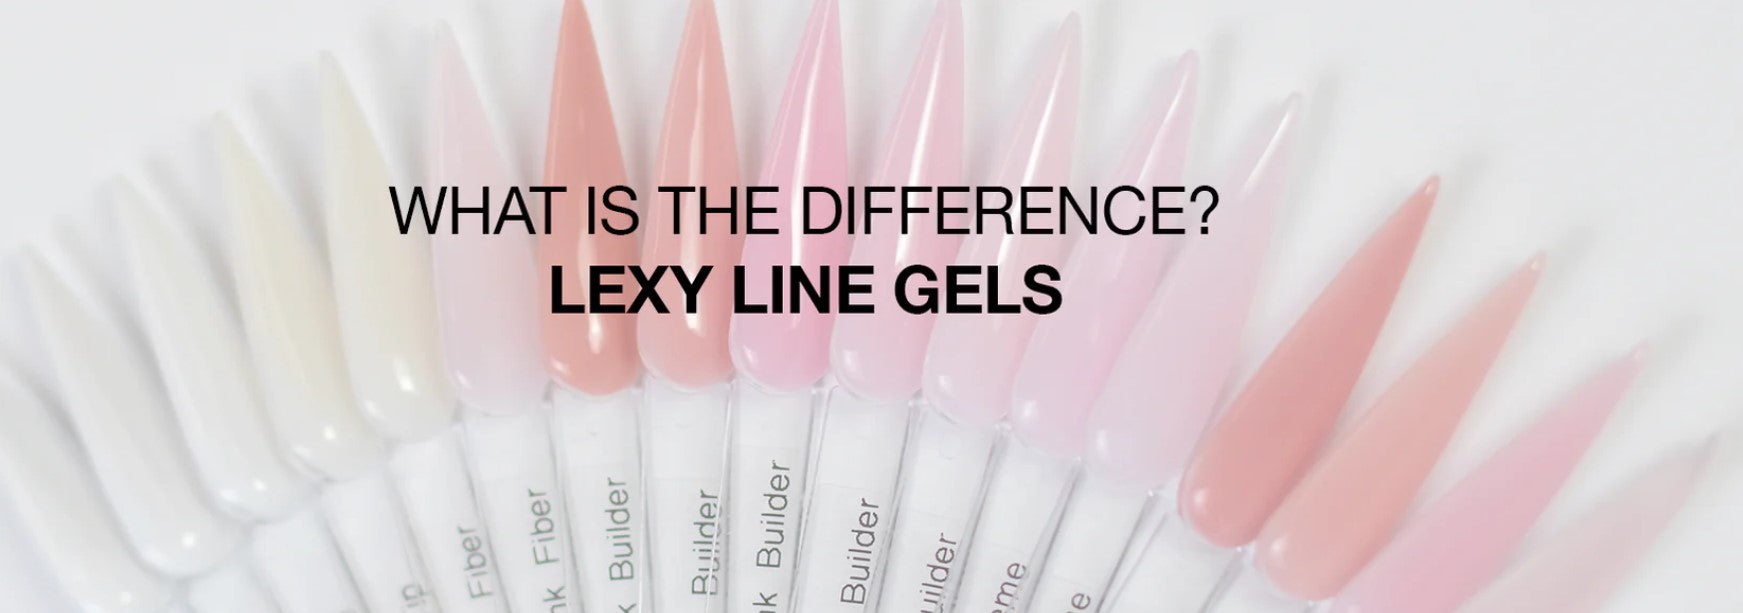 THE DIFFERENCE BETWEEN ALL OF THE LEXY LINE GELS | HEMA FREE HARD BUILDER GELS FROM LIGHT ELEGANCE